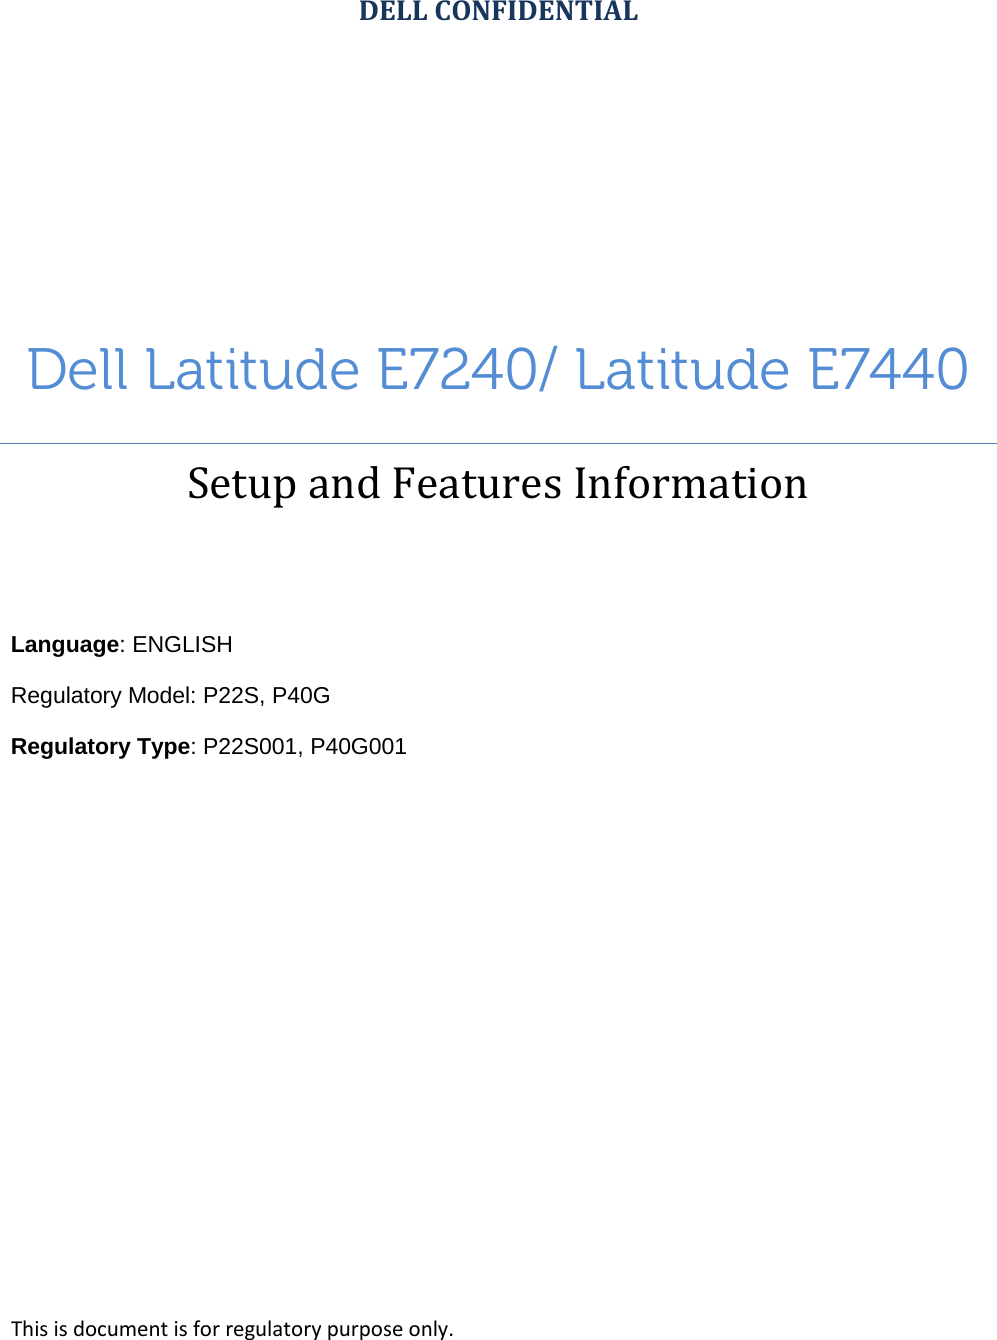 DELL CONFIDENTIAL Dell Latitude E7240/ Latitude E7440 Setup and Features Information      Language: ENGLISH Regulatory Model: P22S, P40G Regulatory Type: P22S001, P40G001       This is document is for regulatory purpose only. 